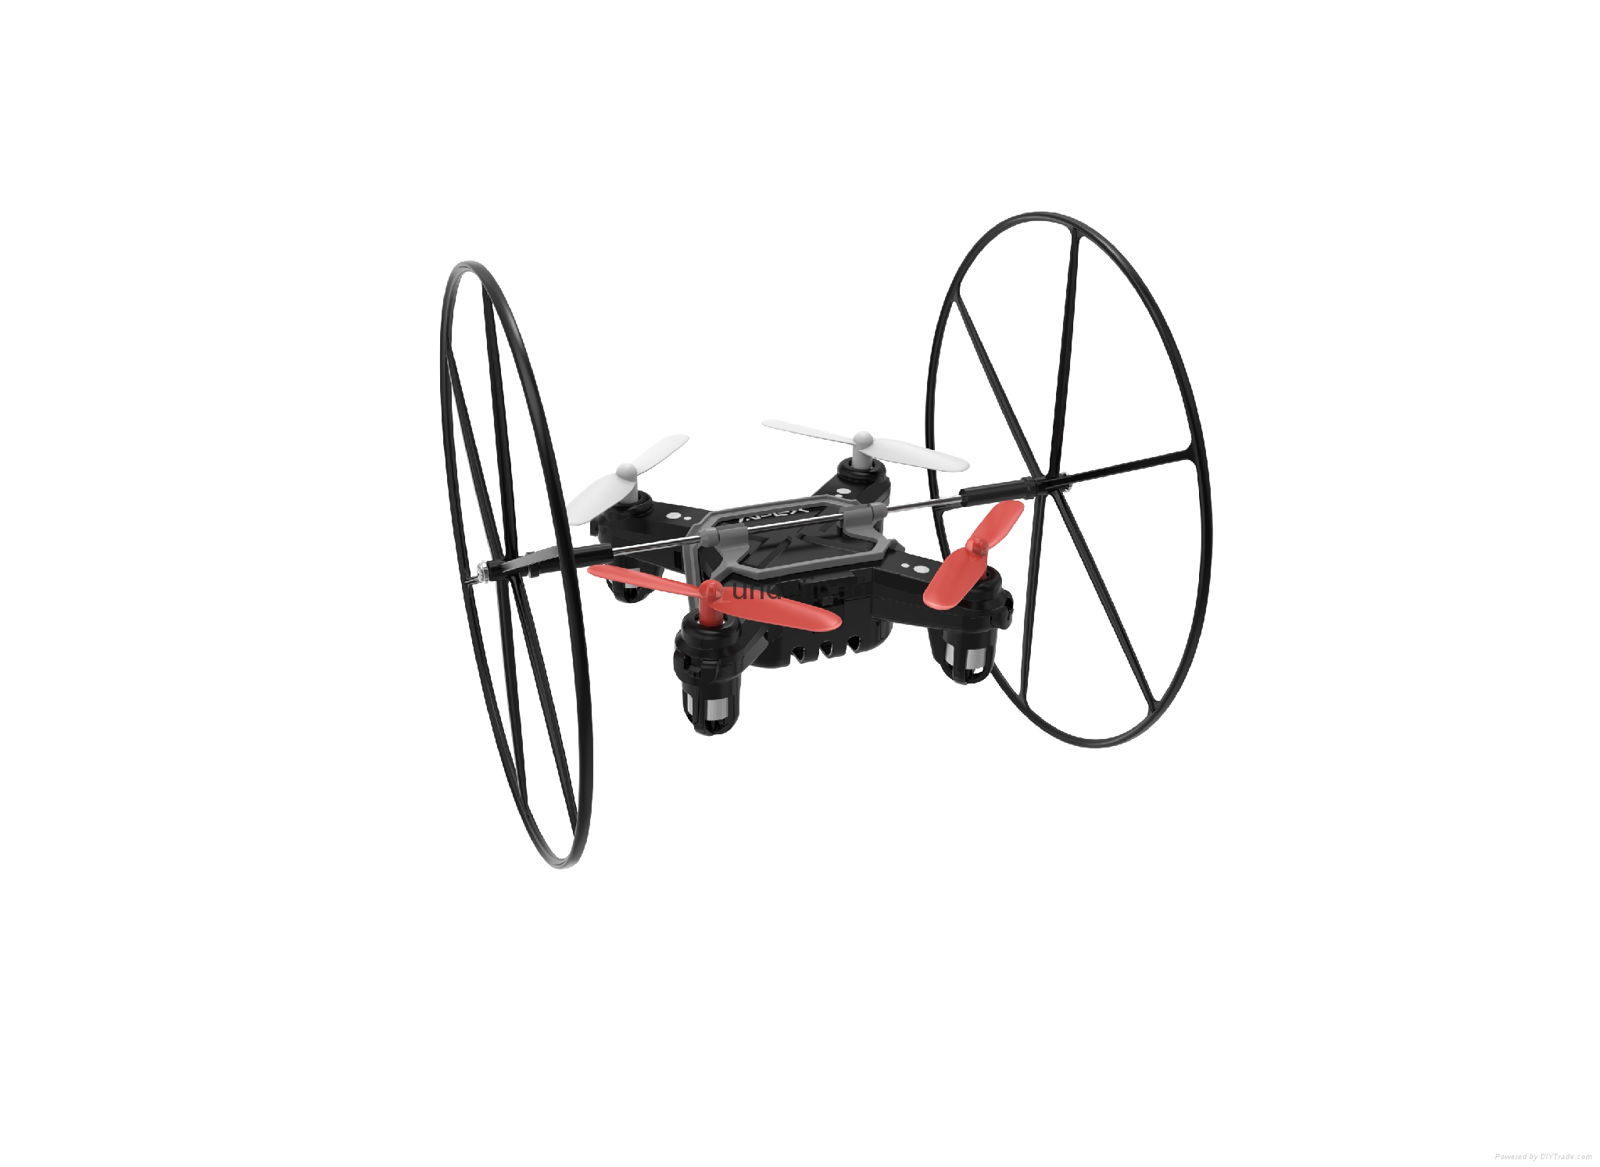 Apex Butterfly Quadcopter with Wheels 2.4G 6-Axis 4 Channels Uav Drone 4